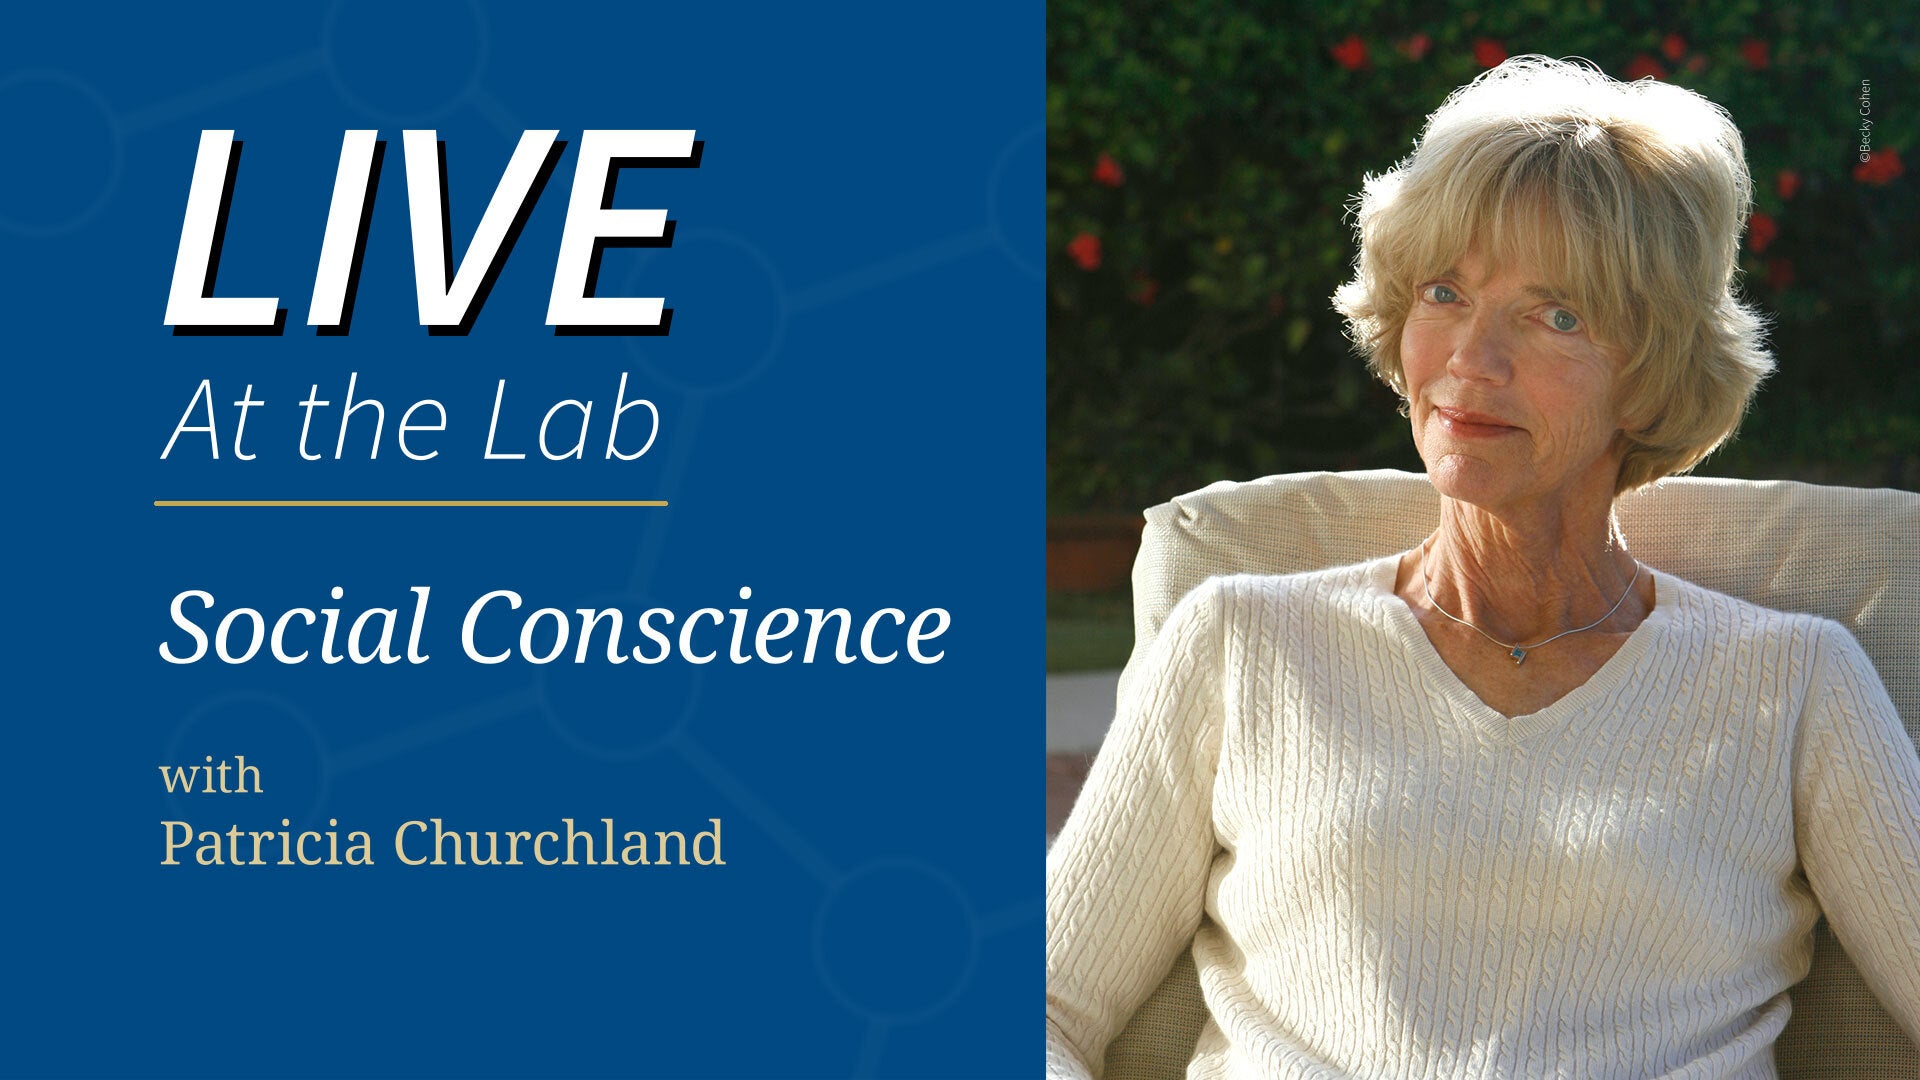 Hero image for Live at the Lab event - CONSCIENCE, with Patricia Churchland